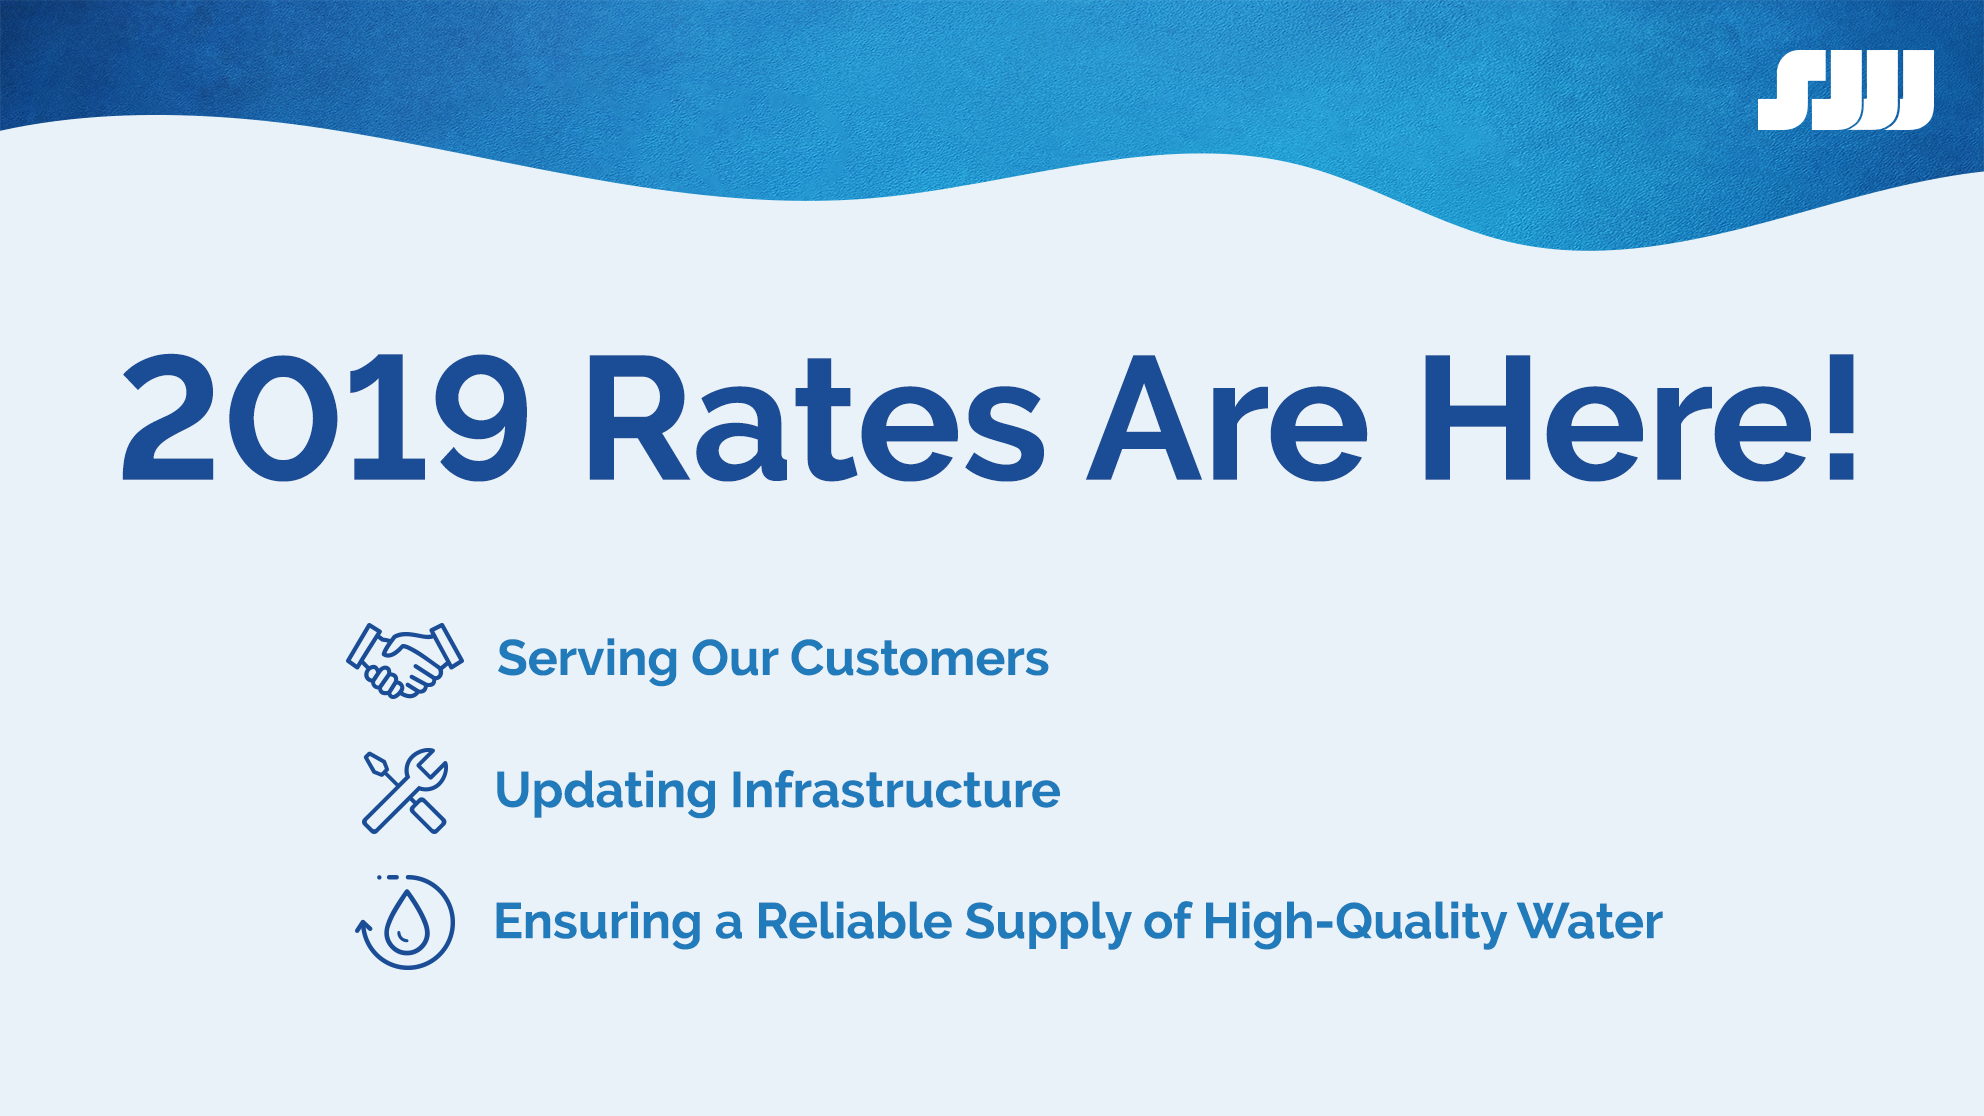 2019 Rates Are Here - Serving our Customers, Updating Infrastructure, Ensuring a reliable supply of high-quality water